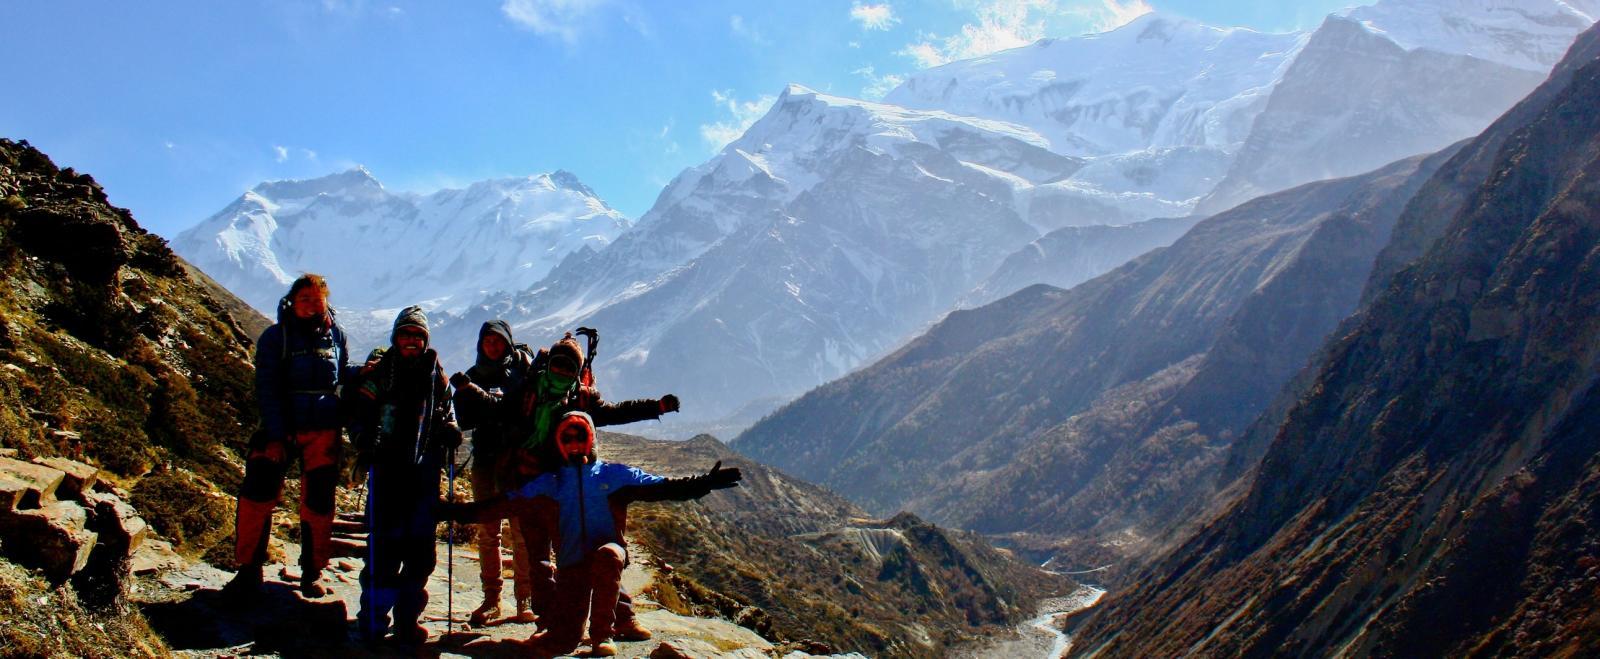 Projects Abroad volunteers climb the snowy Himalayan Mountains while volunteering in Nepal.